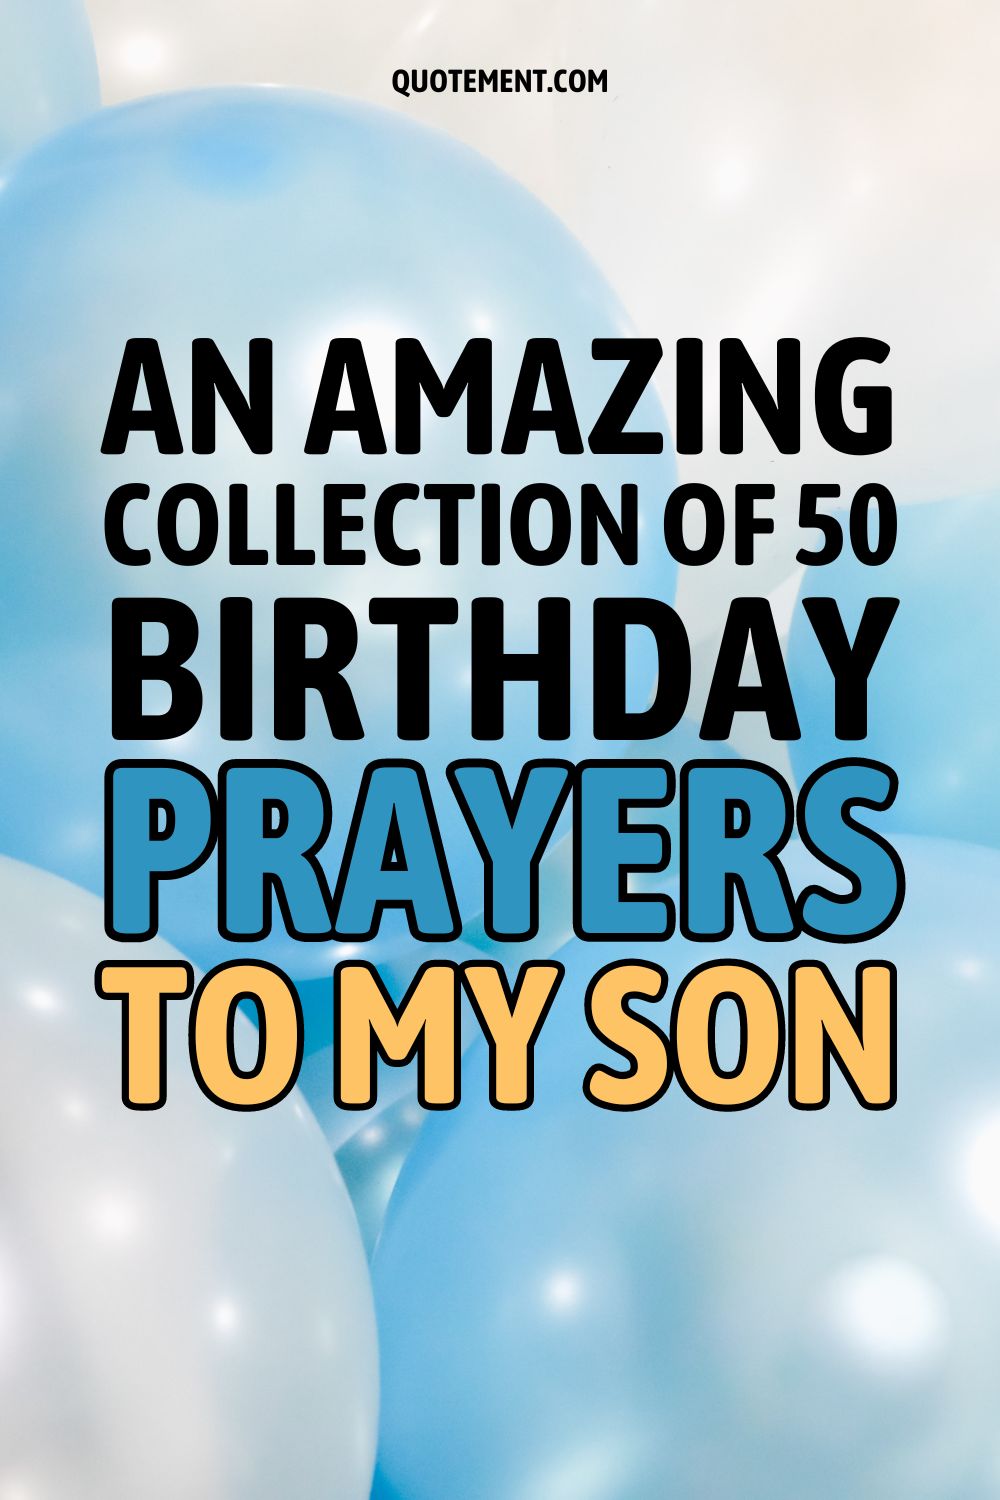 Amazing Collection Of 50 Birthday Prayers To My Son
